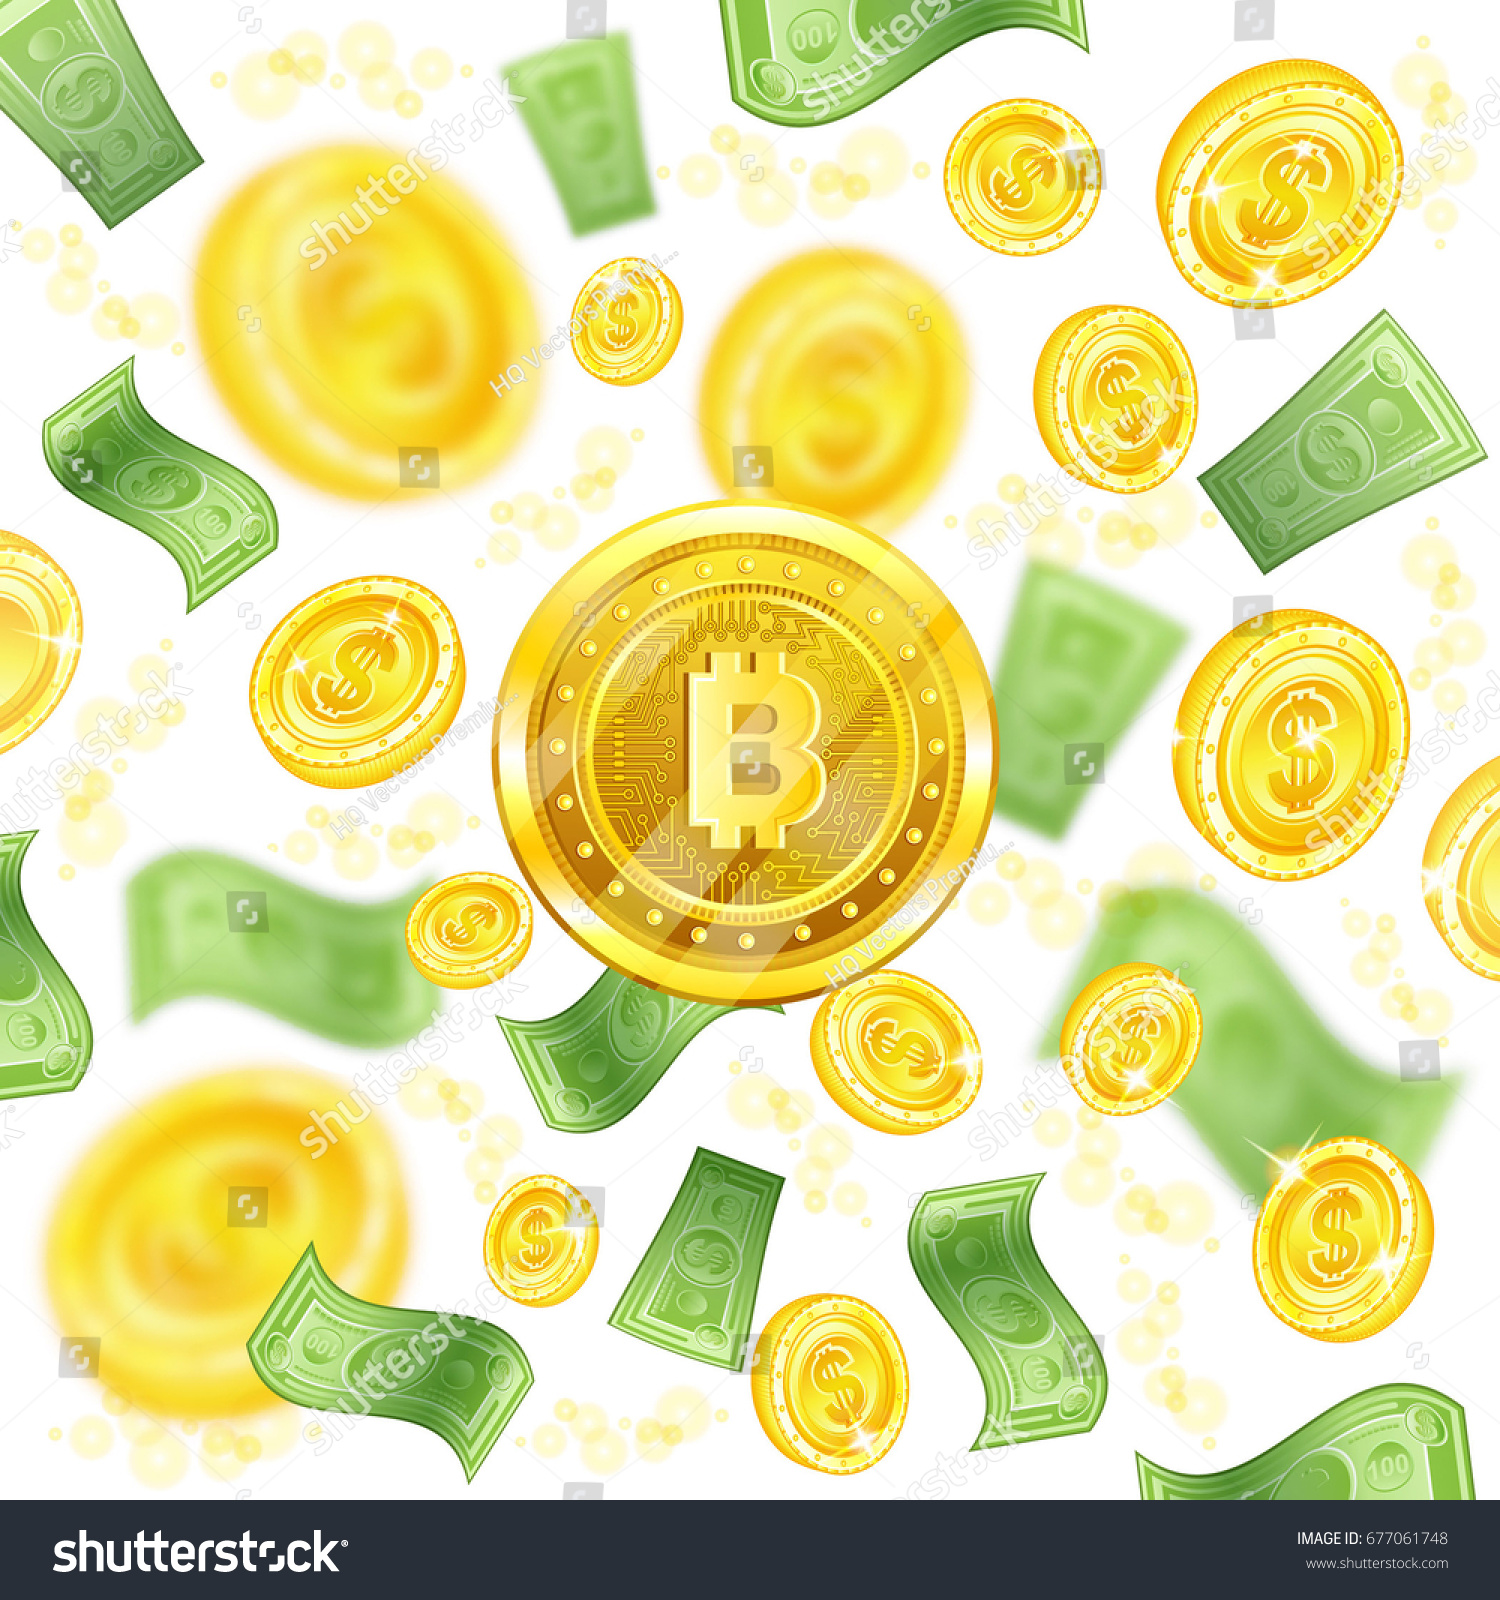 SVG of Golden bit coin in the center of flying coins and banknotes with depth of field effect on white svg